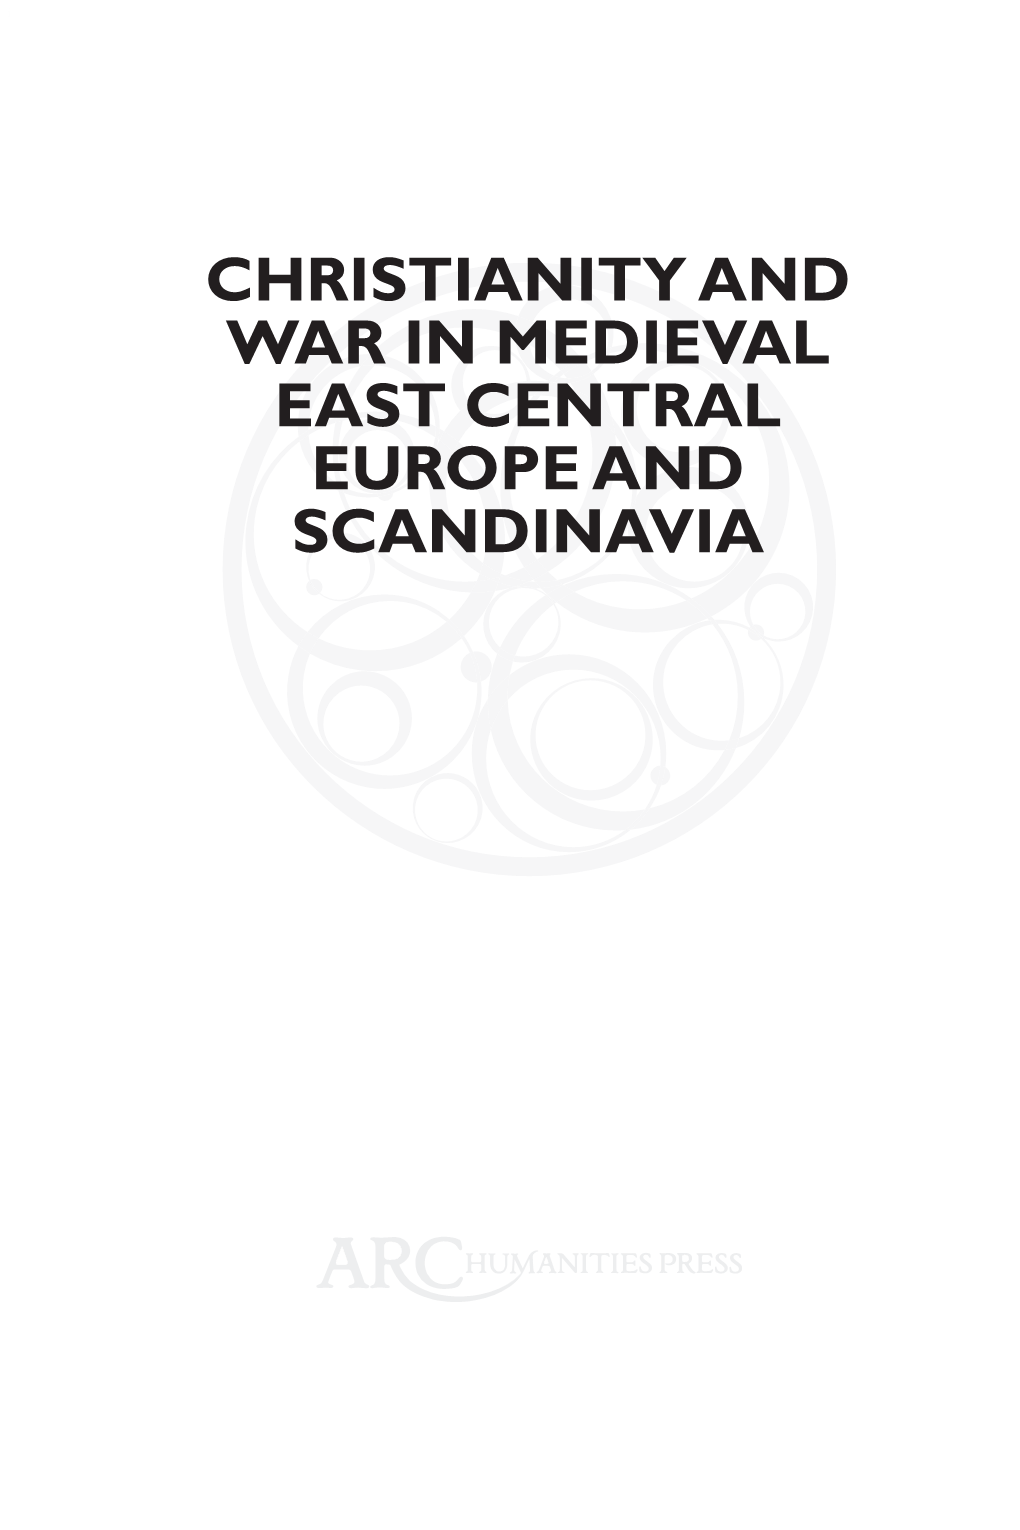 CHRISTIANITY and WAR in MEDIEVAL EAST CENTRAL EUROPE and SCANDINAVIA Ii